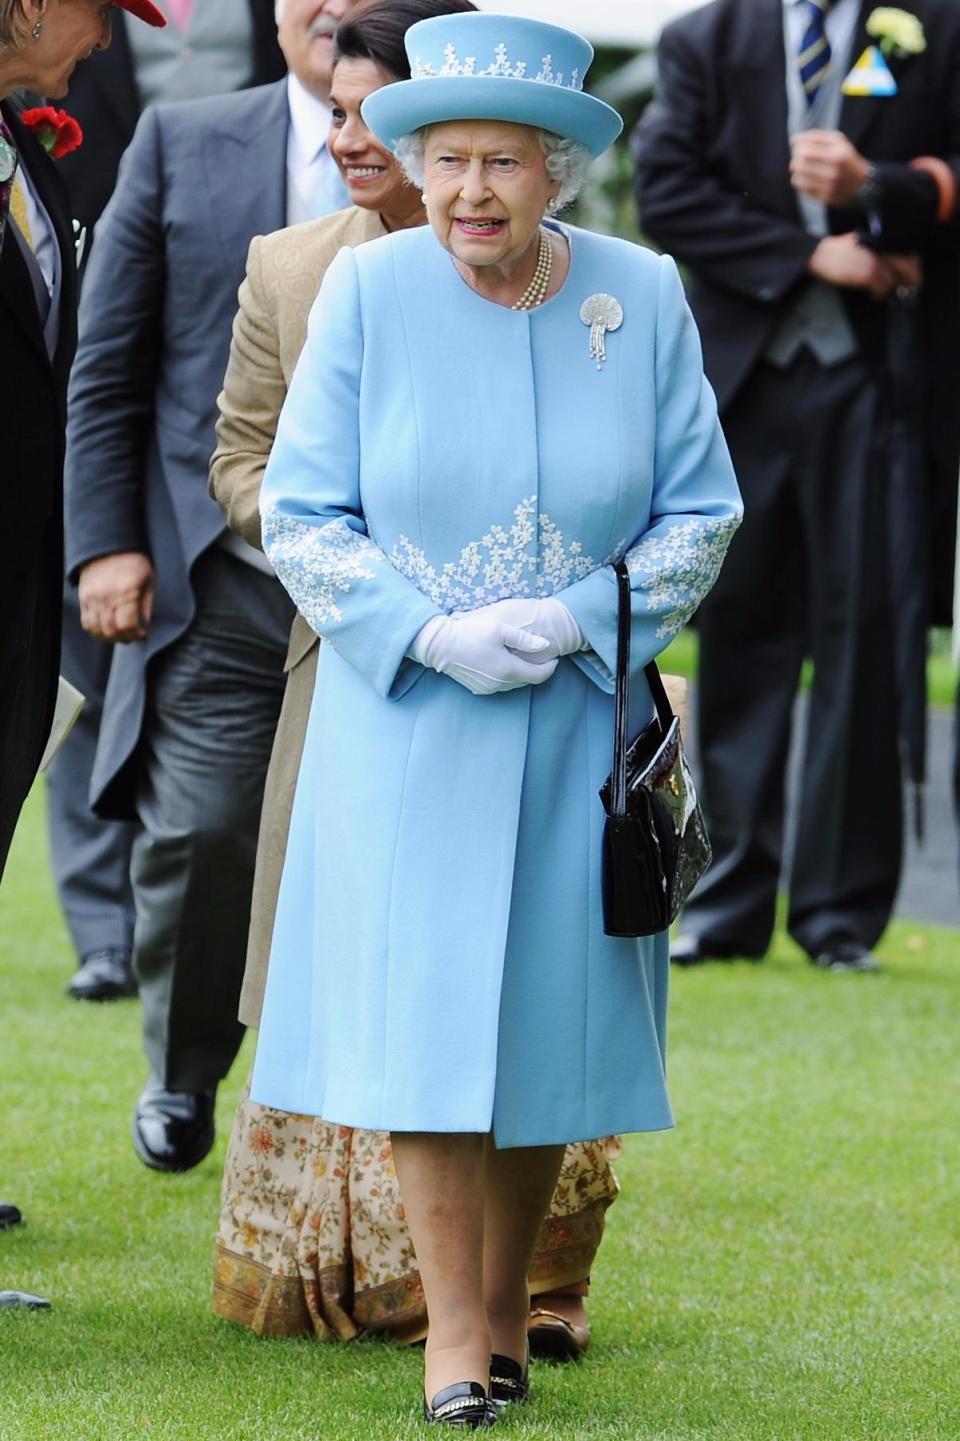 Powder blue is a favourite of the Queen's.